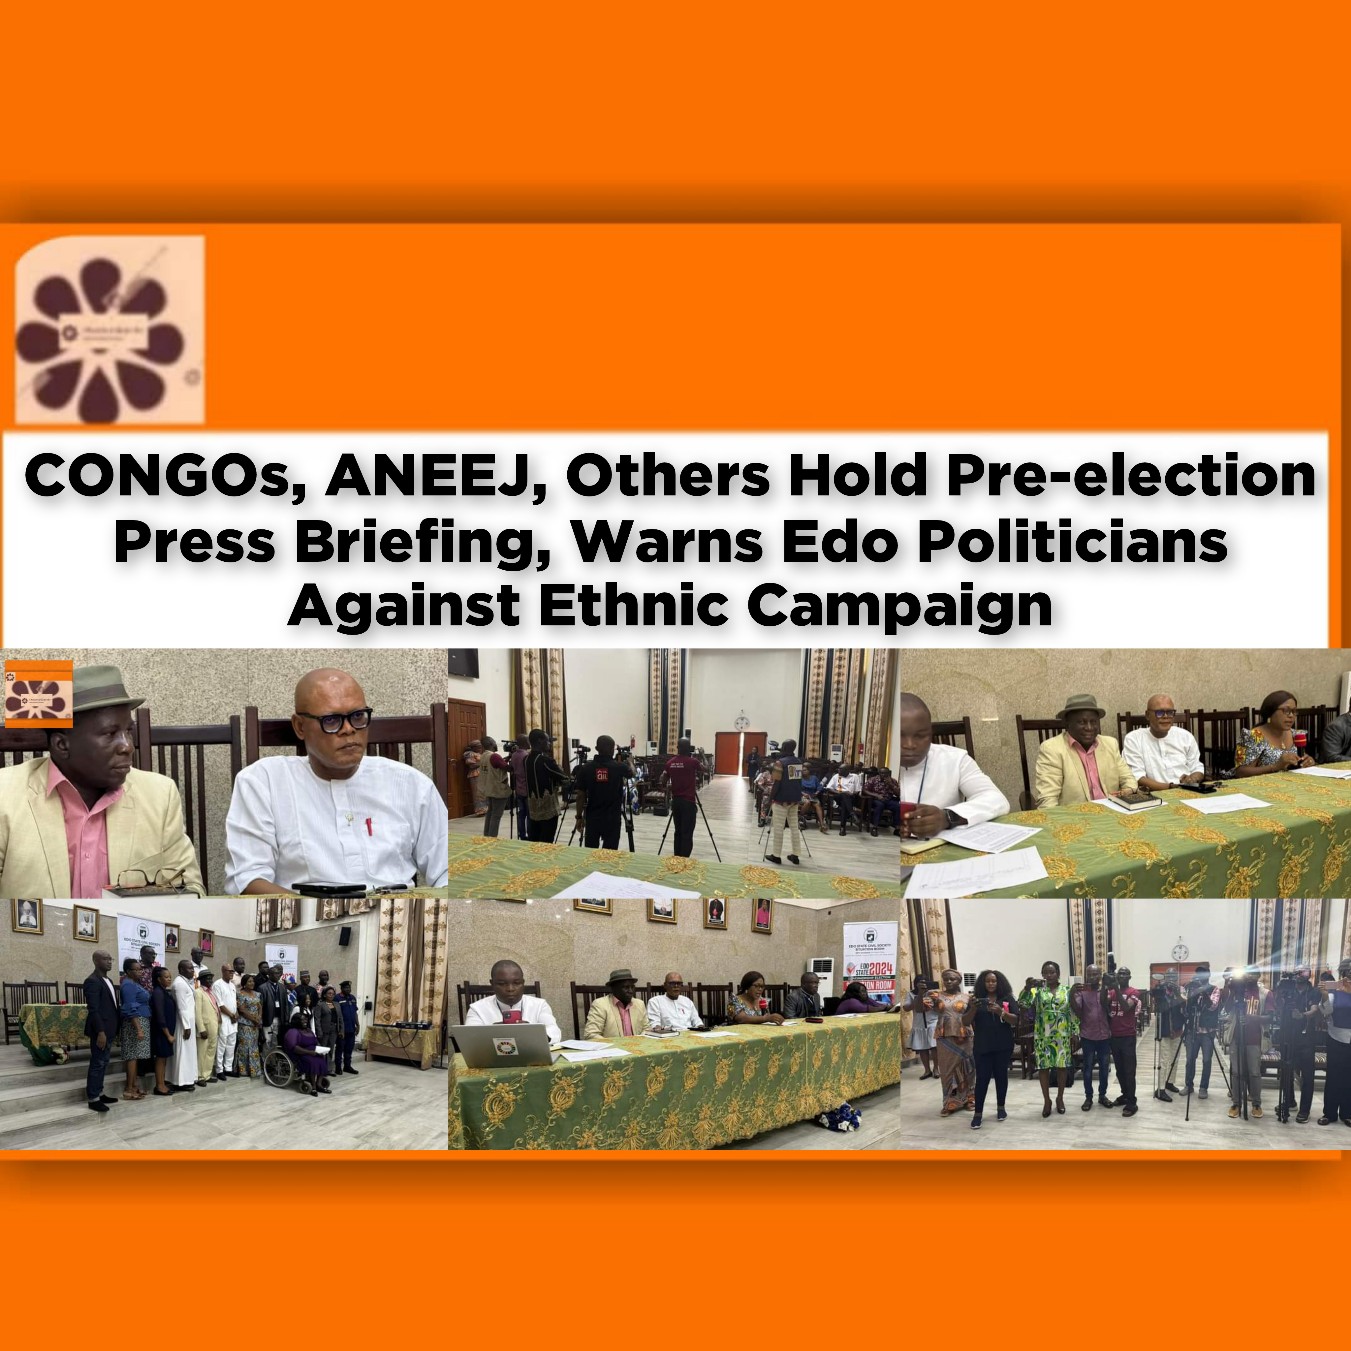 CONGOs, ANEEJ, Others Hold Pre-election Press Briefing, Warns Edo Politicians Against Ethnic Campaign ~ OsazuwaAkonedo #Doctors